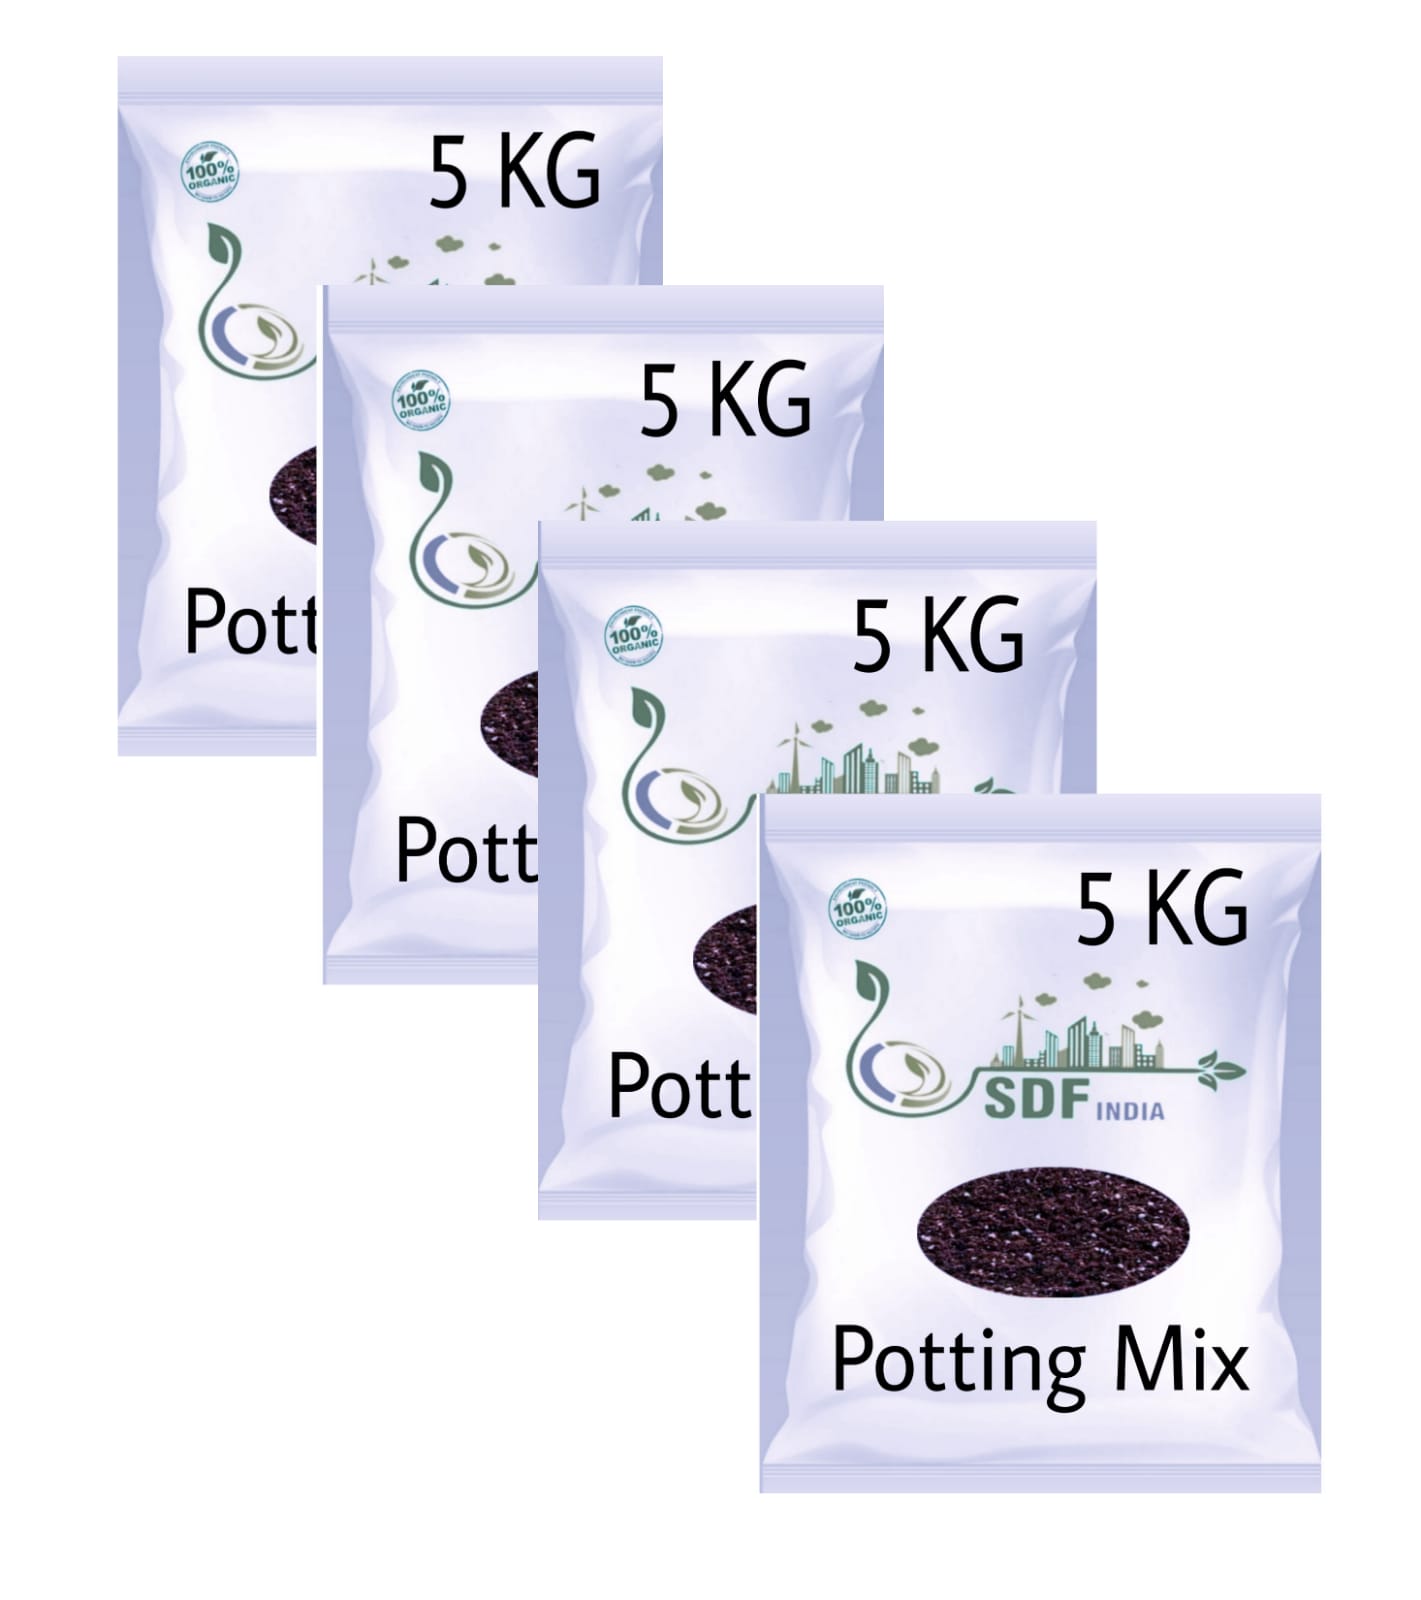 SDFindia  20 KG Potting Mix 4 PACK OF 5KG